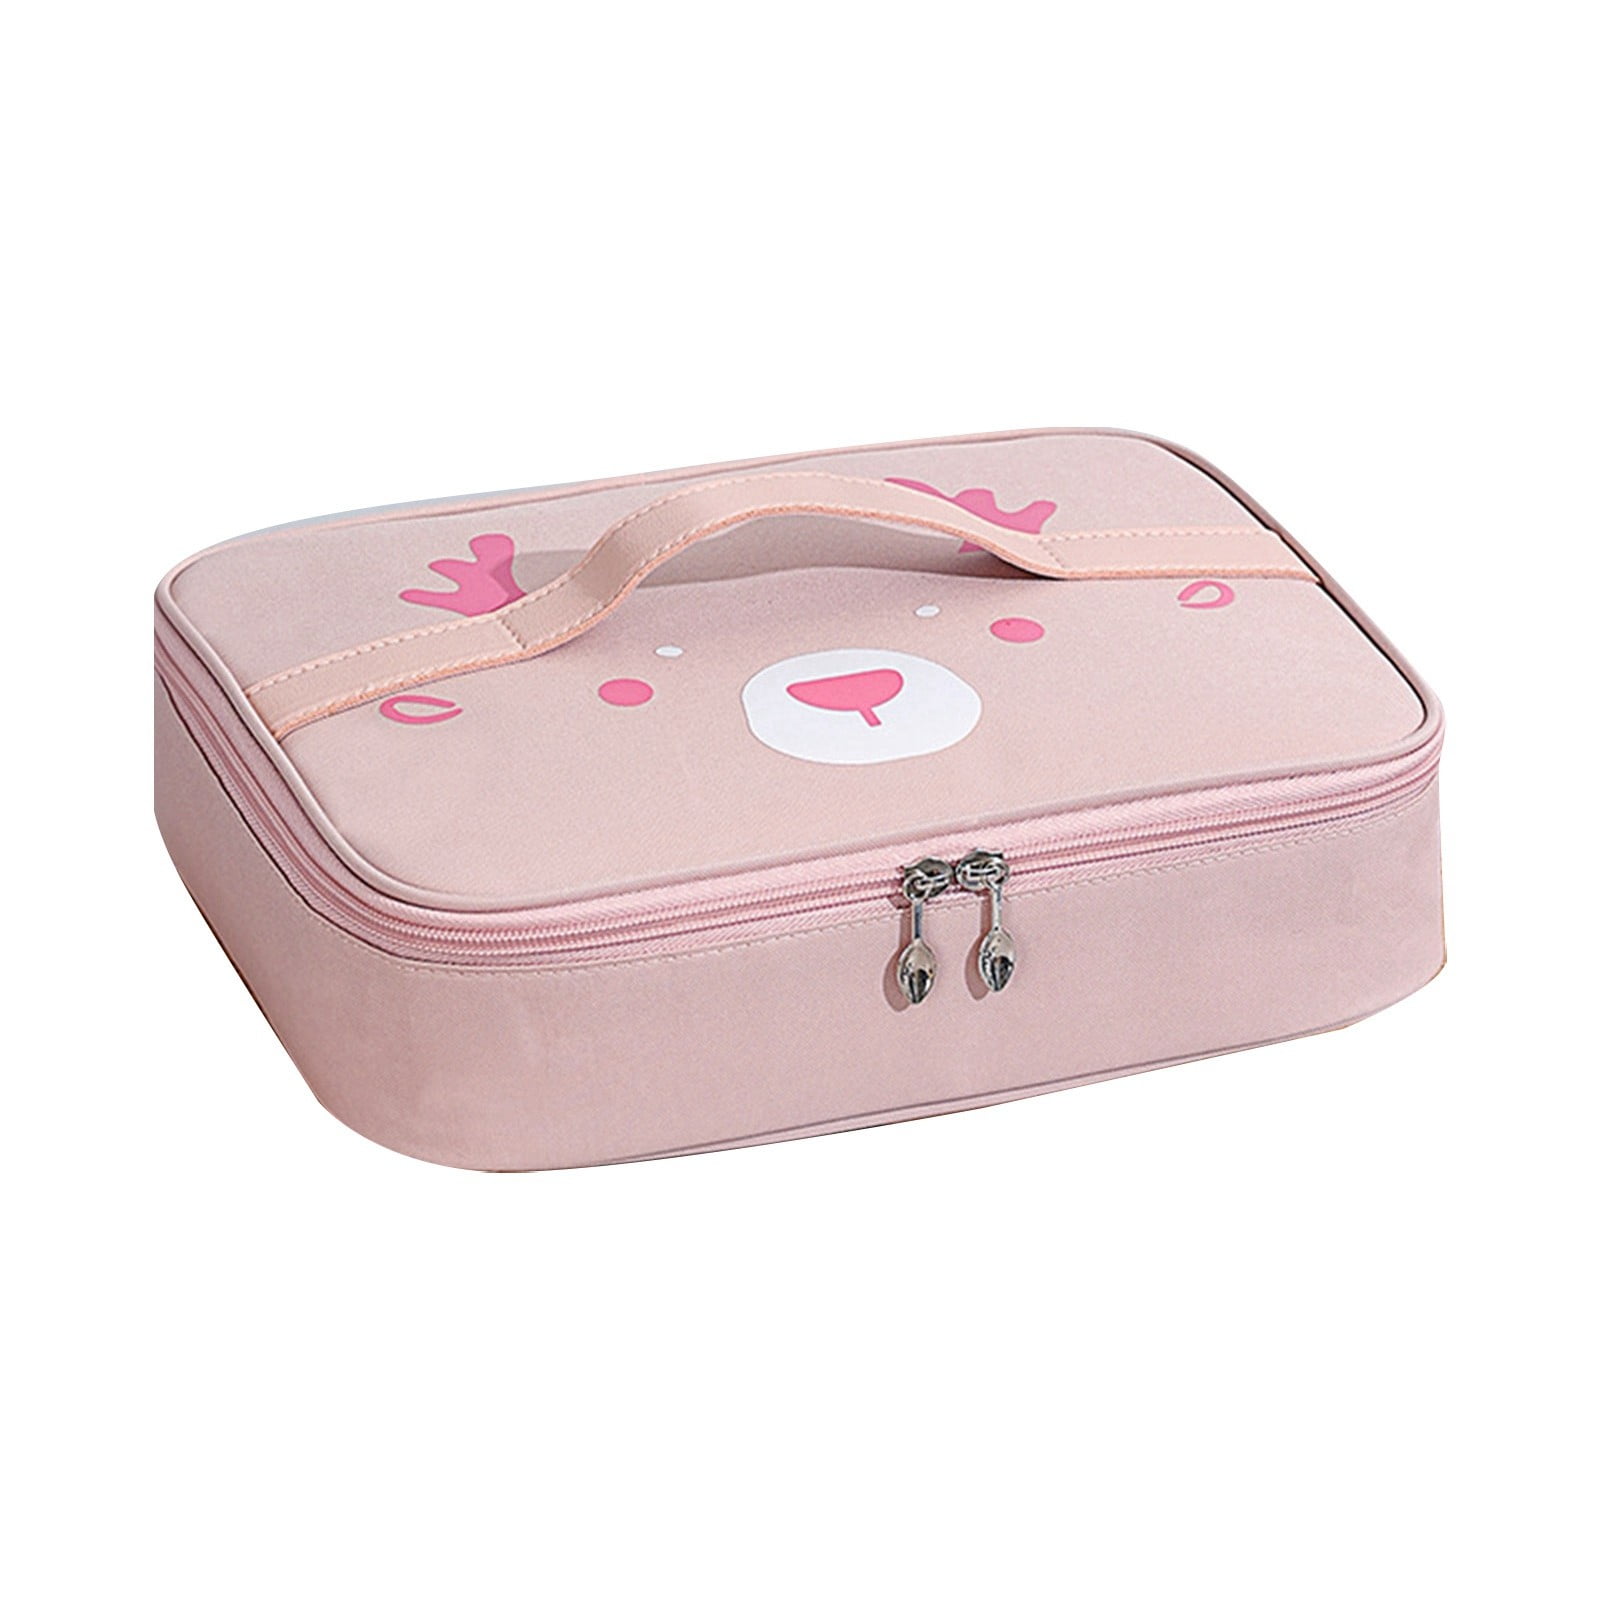 CBGELRT Bento Lunch Box Large Capacity Flat Lunchbox Containers Leakproof  Reusable Lunch Bags Women Kids for Work School Picnic